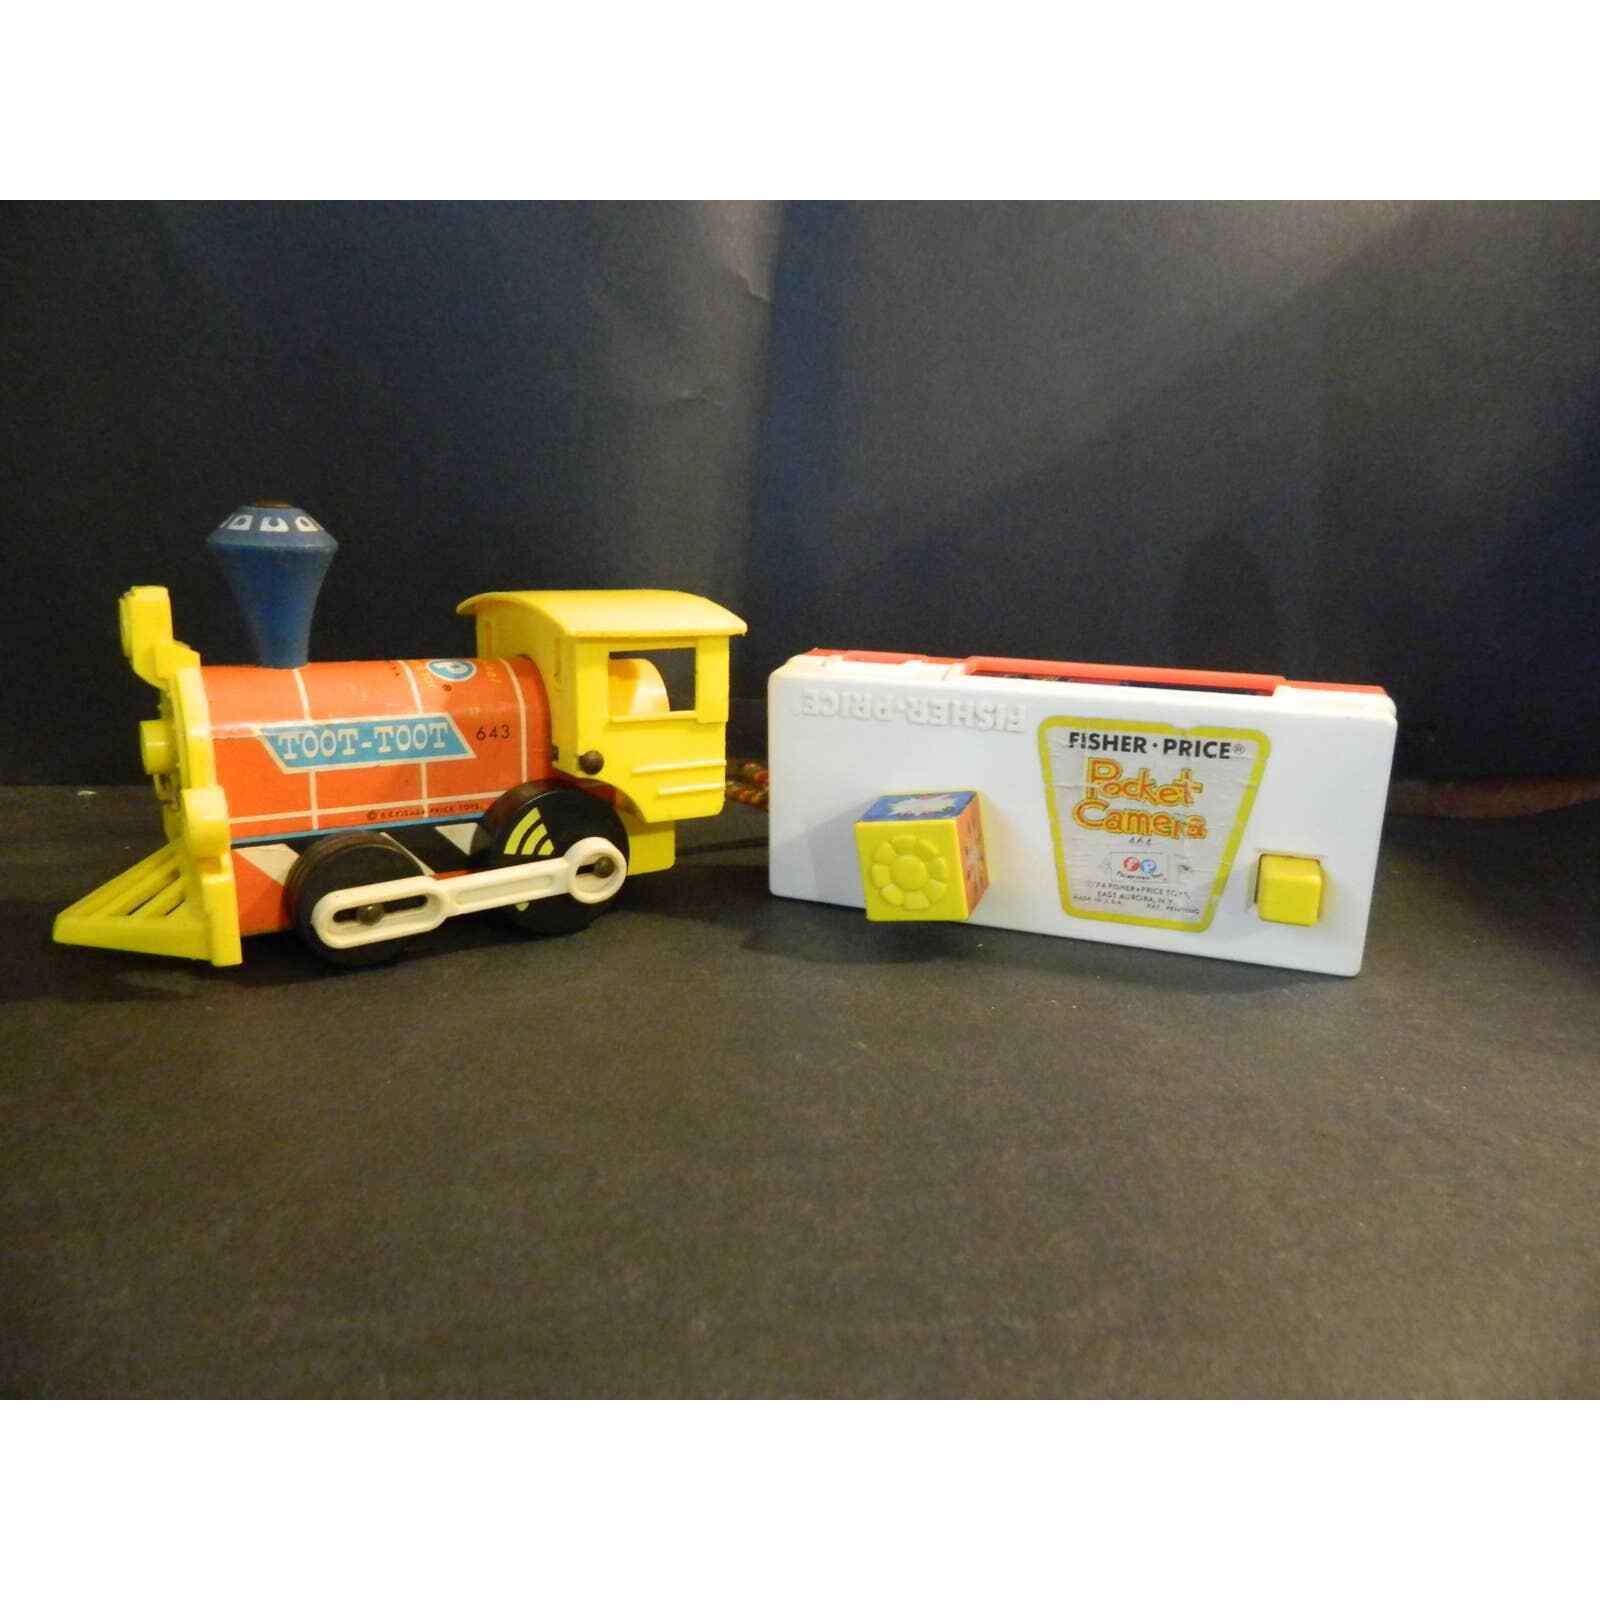 Vintage Fisher Price Train Toot Toot 1964 643, & Pocket Camera 464